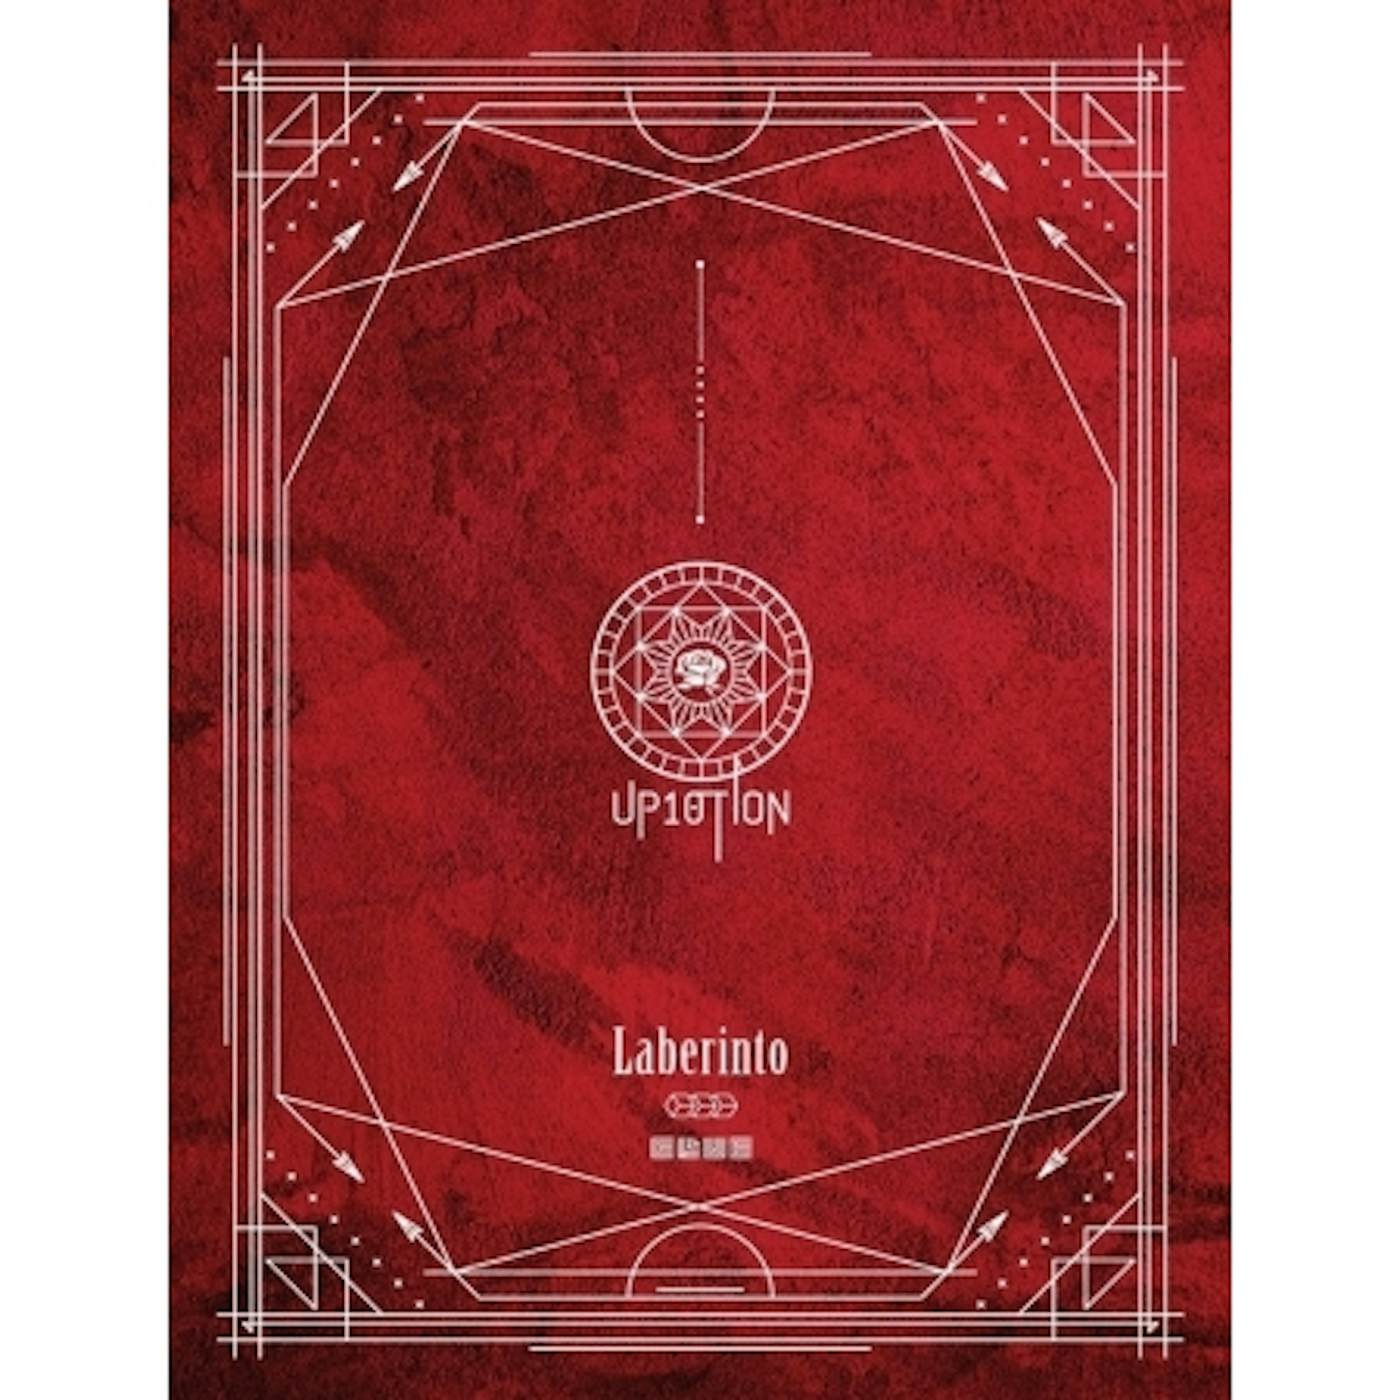 UP10TION LABERINTO (CUBE VERSION) CD